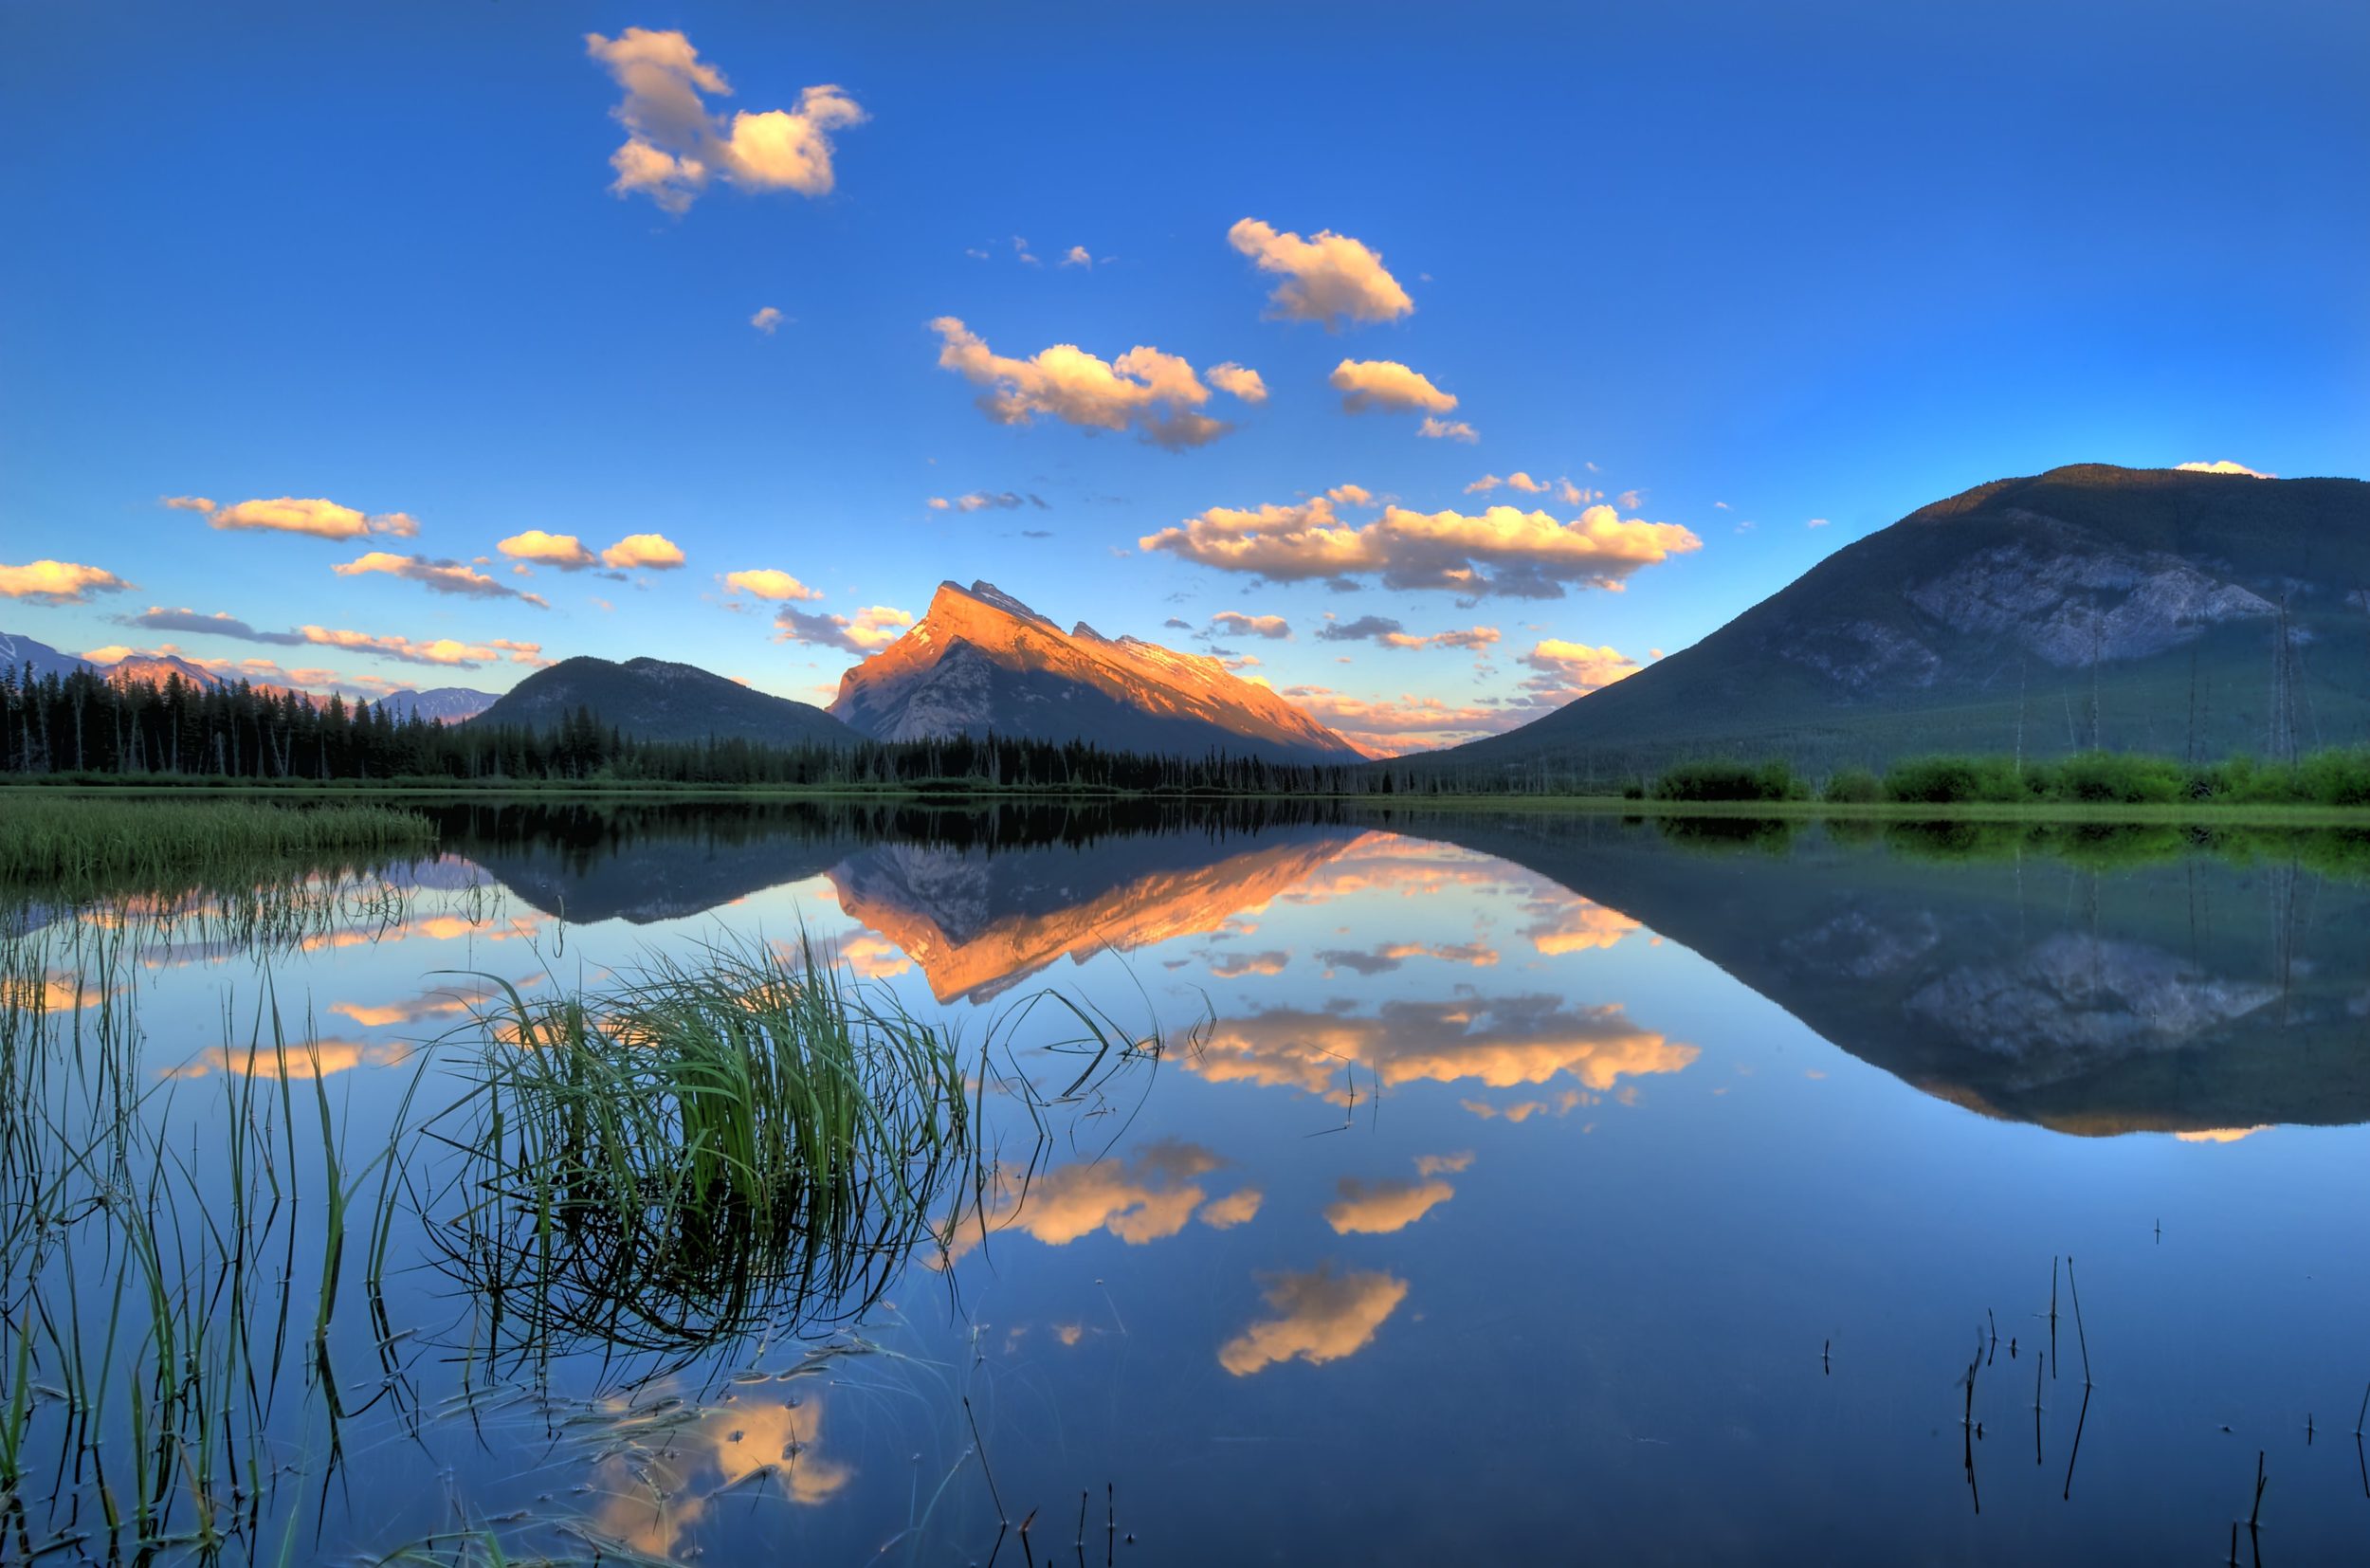  Vermillion lakes and Mt Rundle, Canadian Rockies 